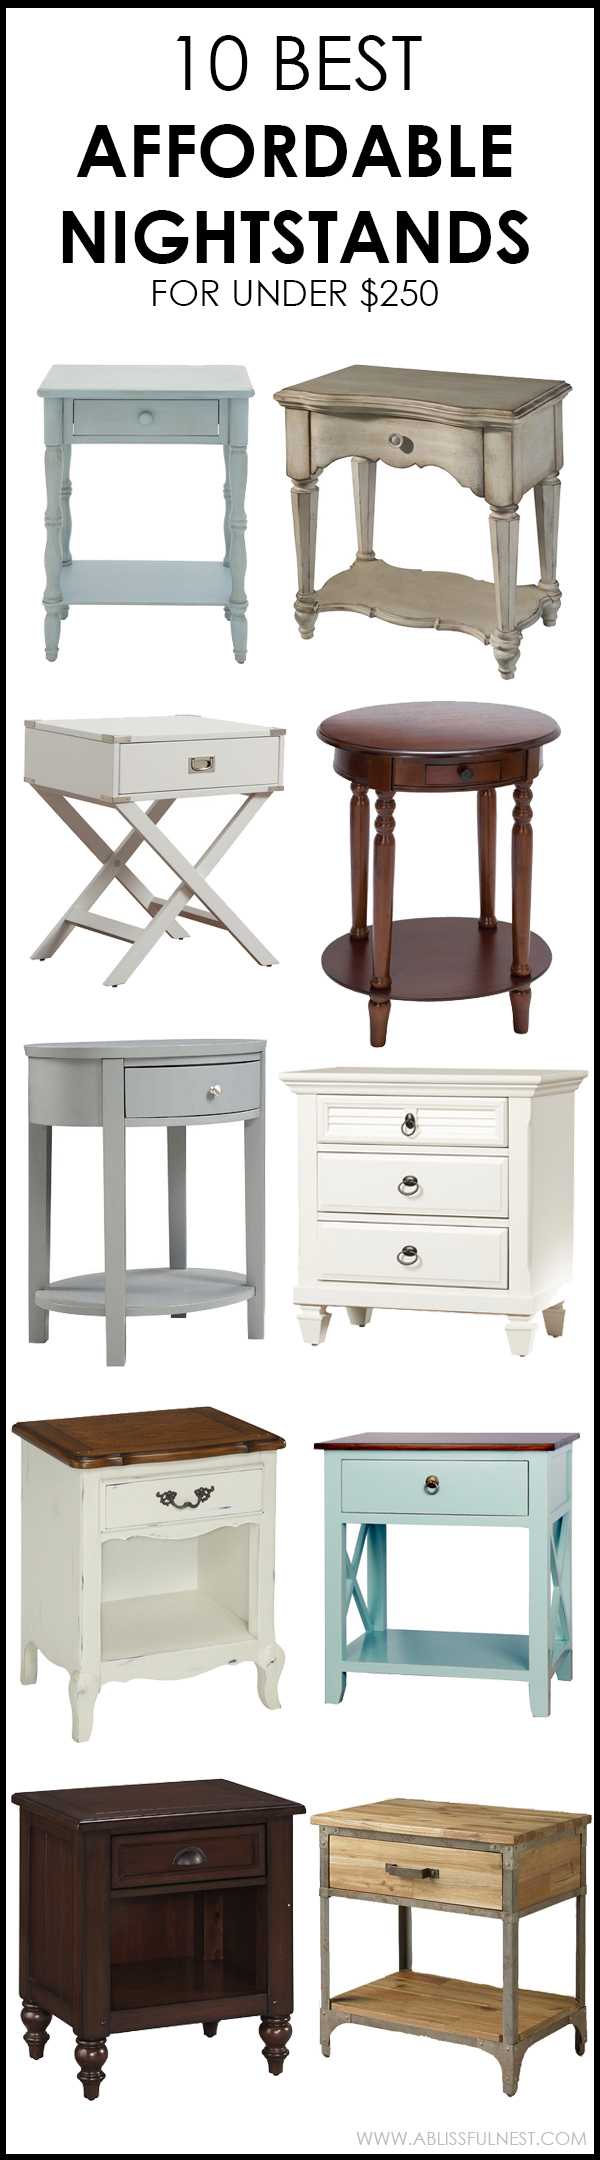 We've got 10 of the best affordable nightstands for you to choose from! If you are looking for the perfect nightstand for your bedroom or even a small side table, we have you covered on ablissfulnest.com